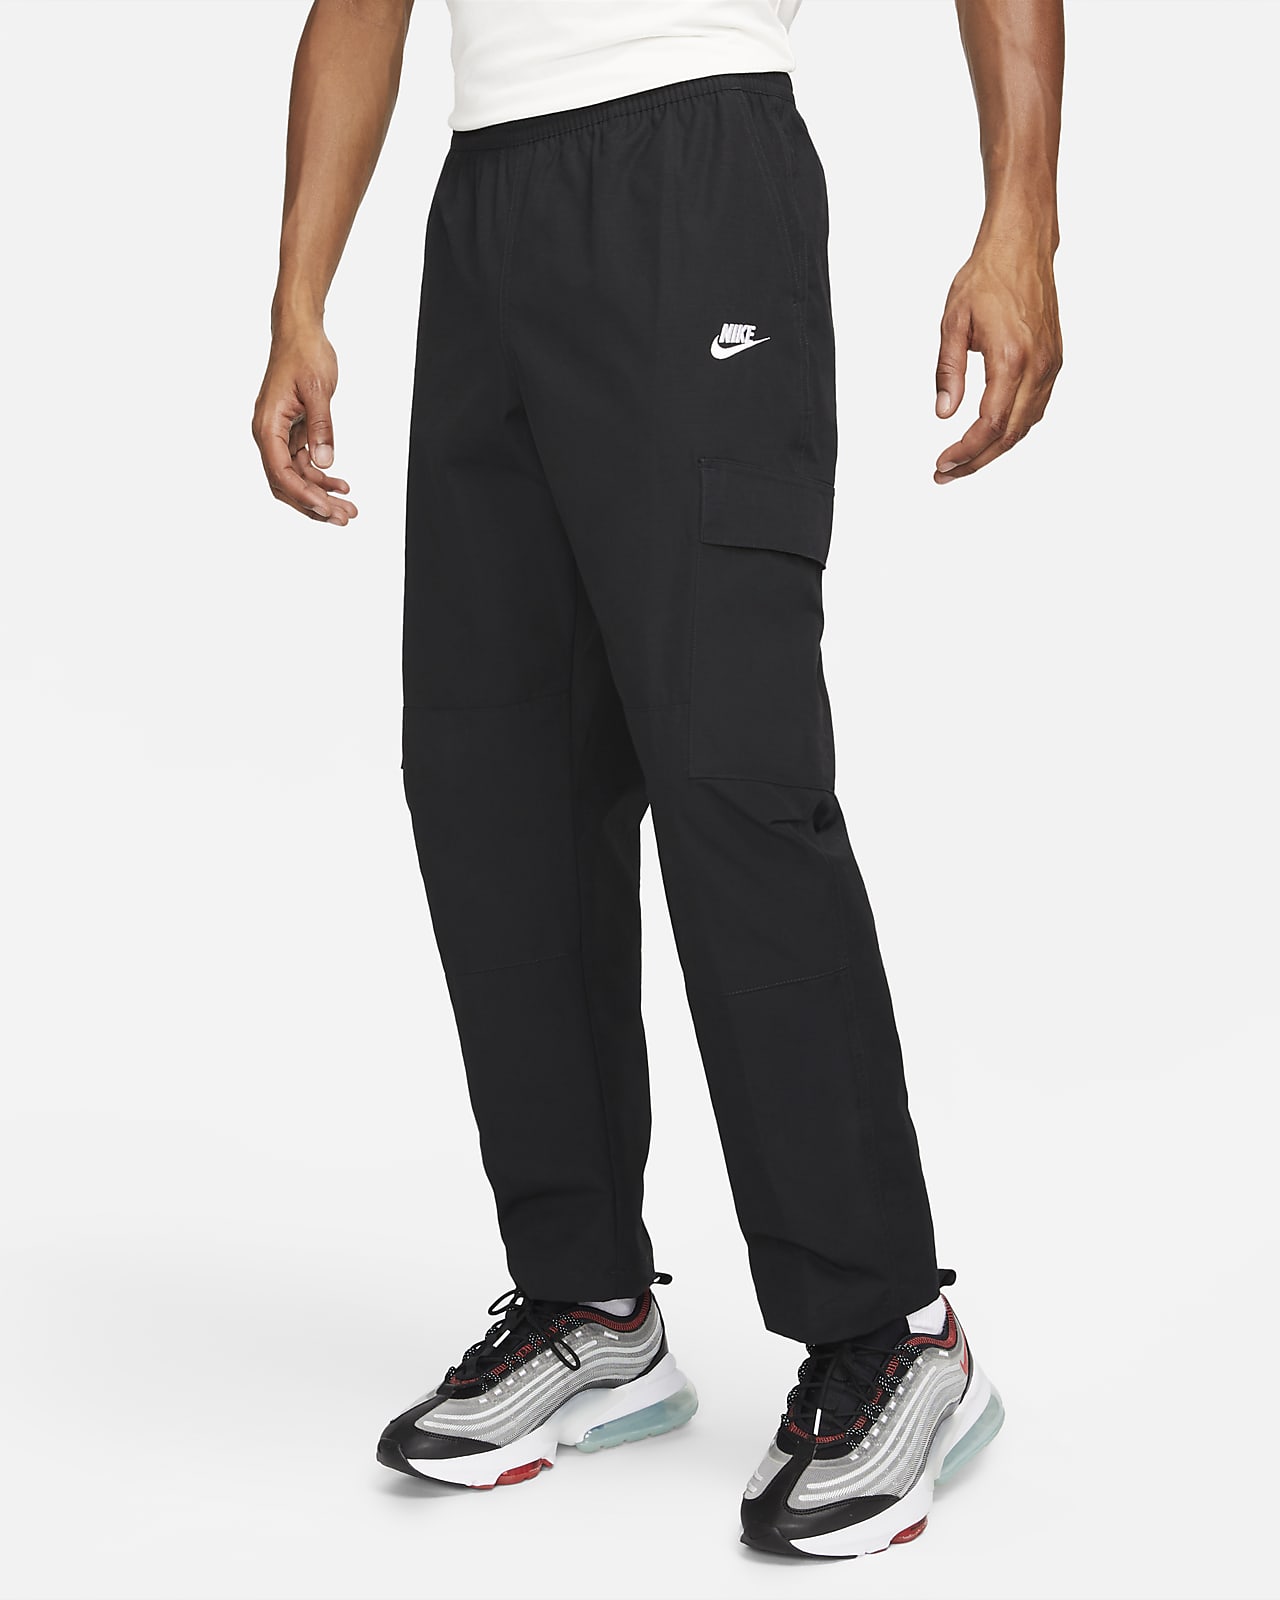 https://static.nike.com/a/images/t_PDP_1280_v1/f_auto,q_auto:eco/e686fc6a-ff3a-41b8-ab2d-62af964b1e5c/pantalon-cargo-tisse-club-pour-sWD8pc.png